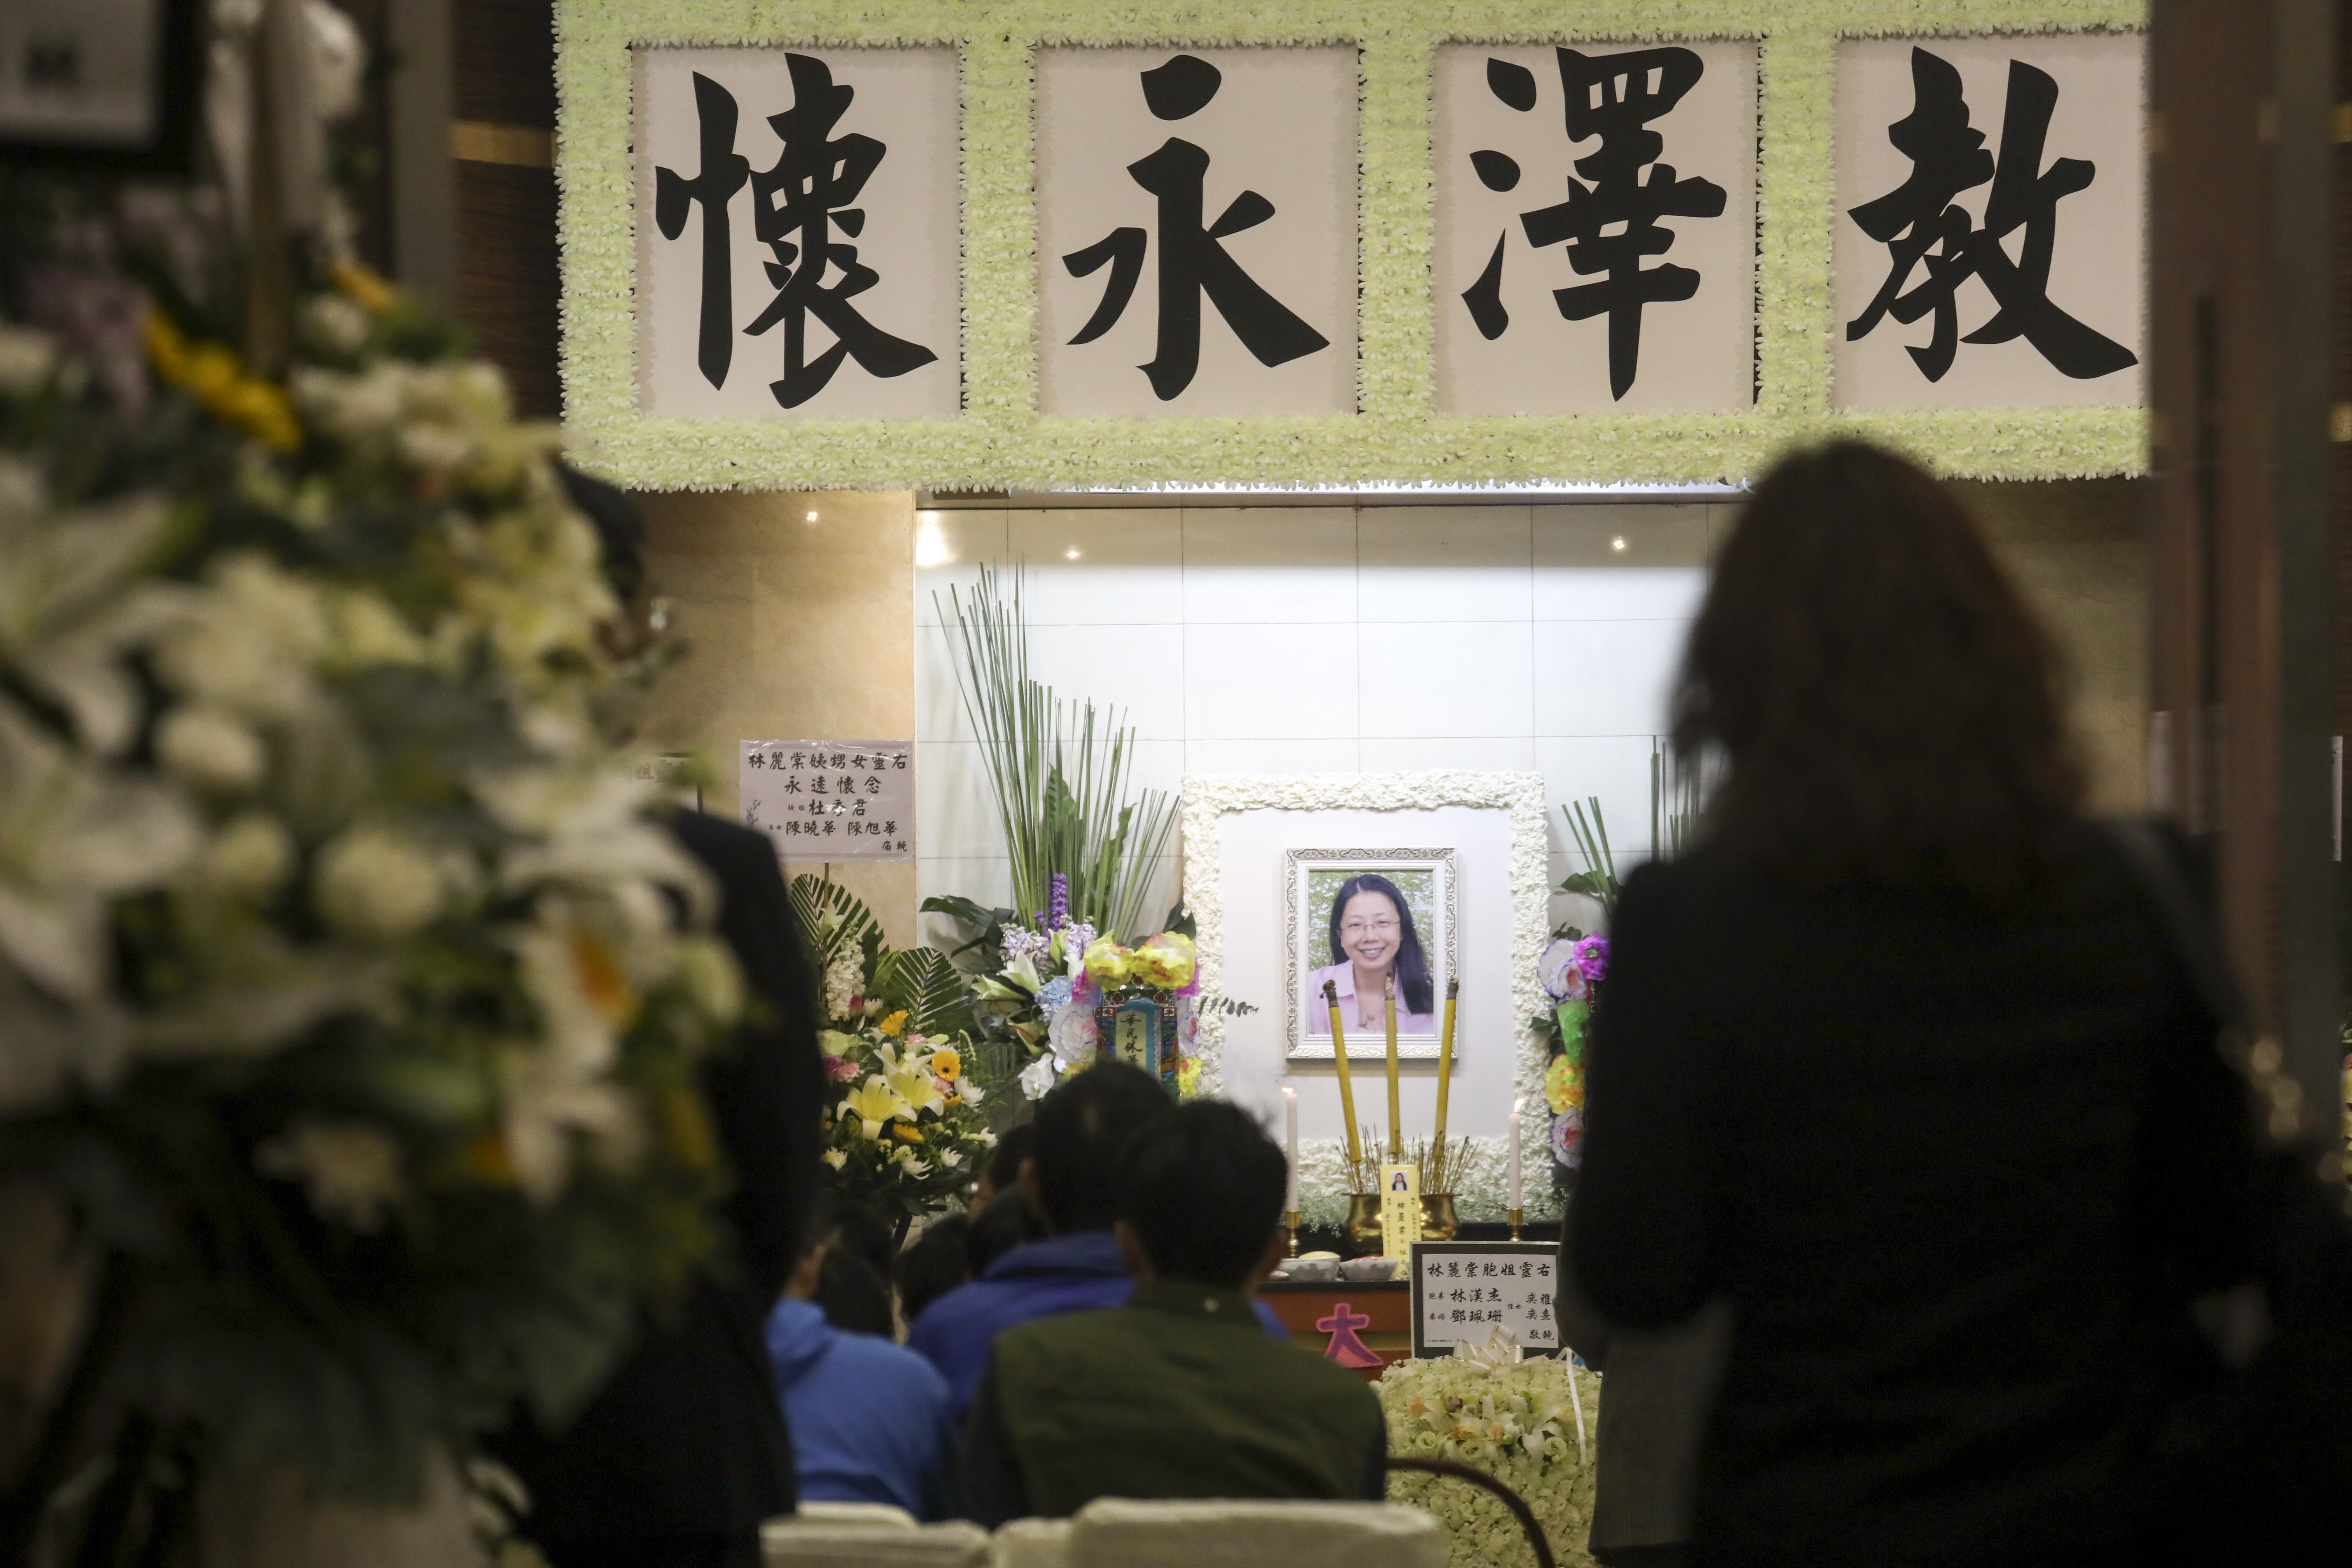 Lam Lai-tong, a Chinese and library studies teacher, fell to her death at her school in Tin Shui Wai in March. Photo: Felix Wong